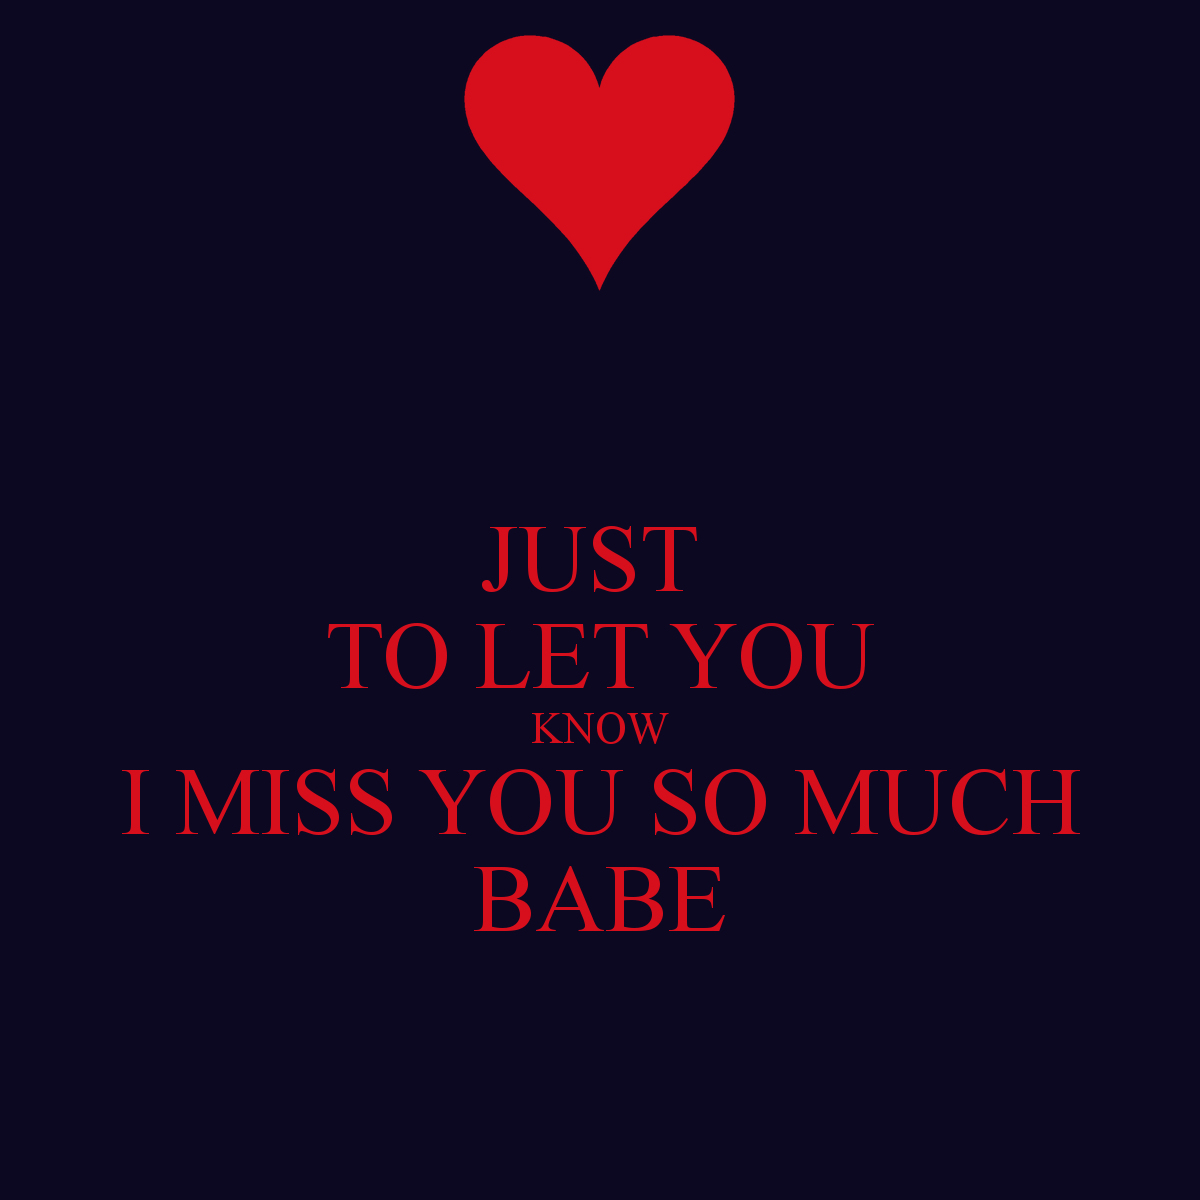 Miss You Babe Quotes. QuotesGram